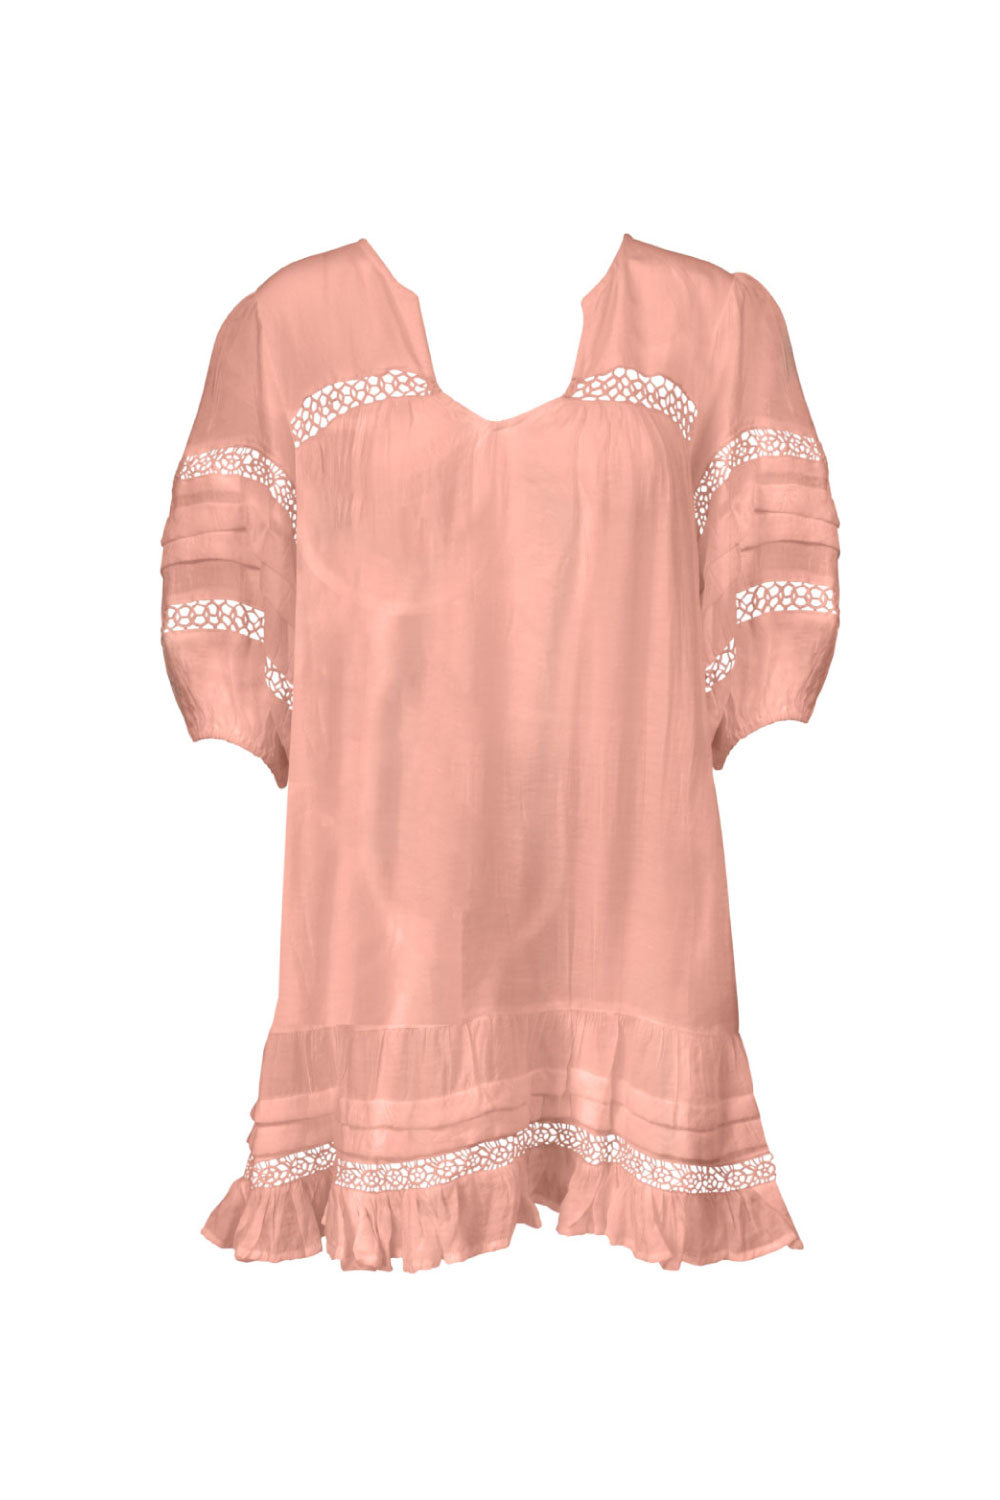 Image of the front of the Chronos Dress in Peach.